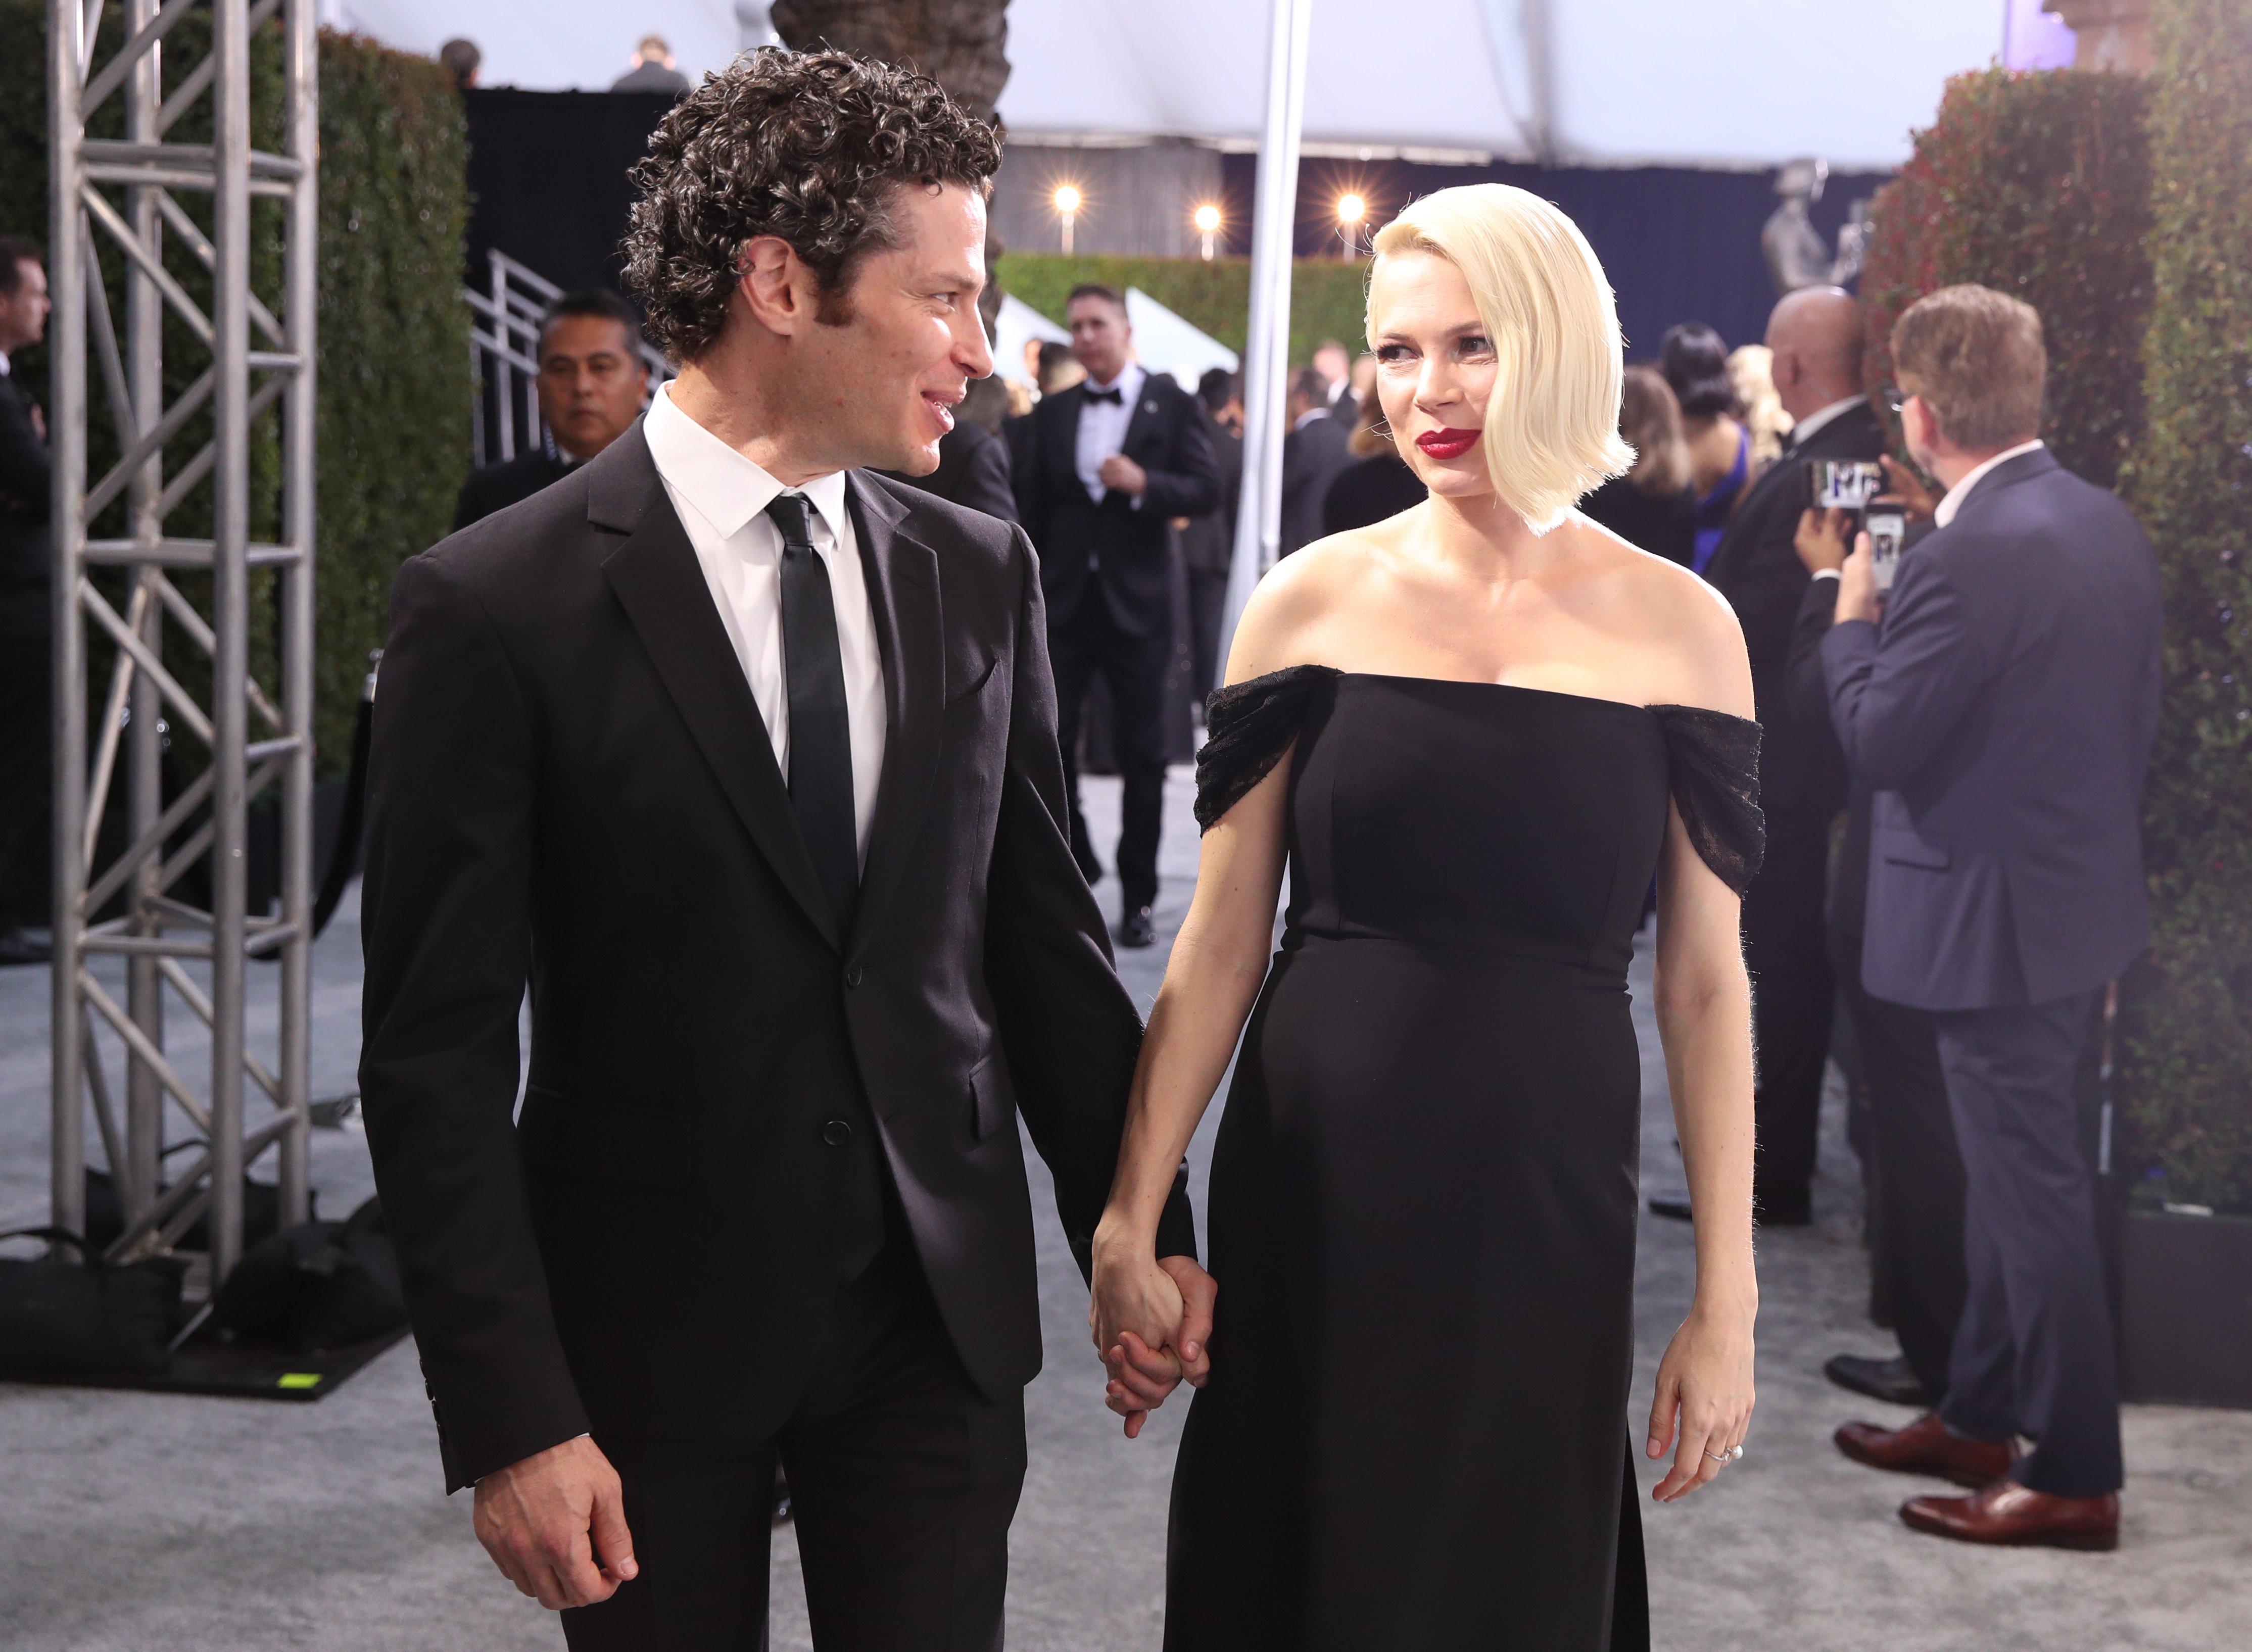 Michelle Williams and Thomas Kail in Los Angeles in 20202. | Source: Getty Images